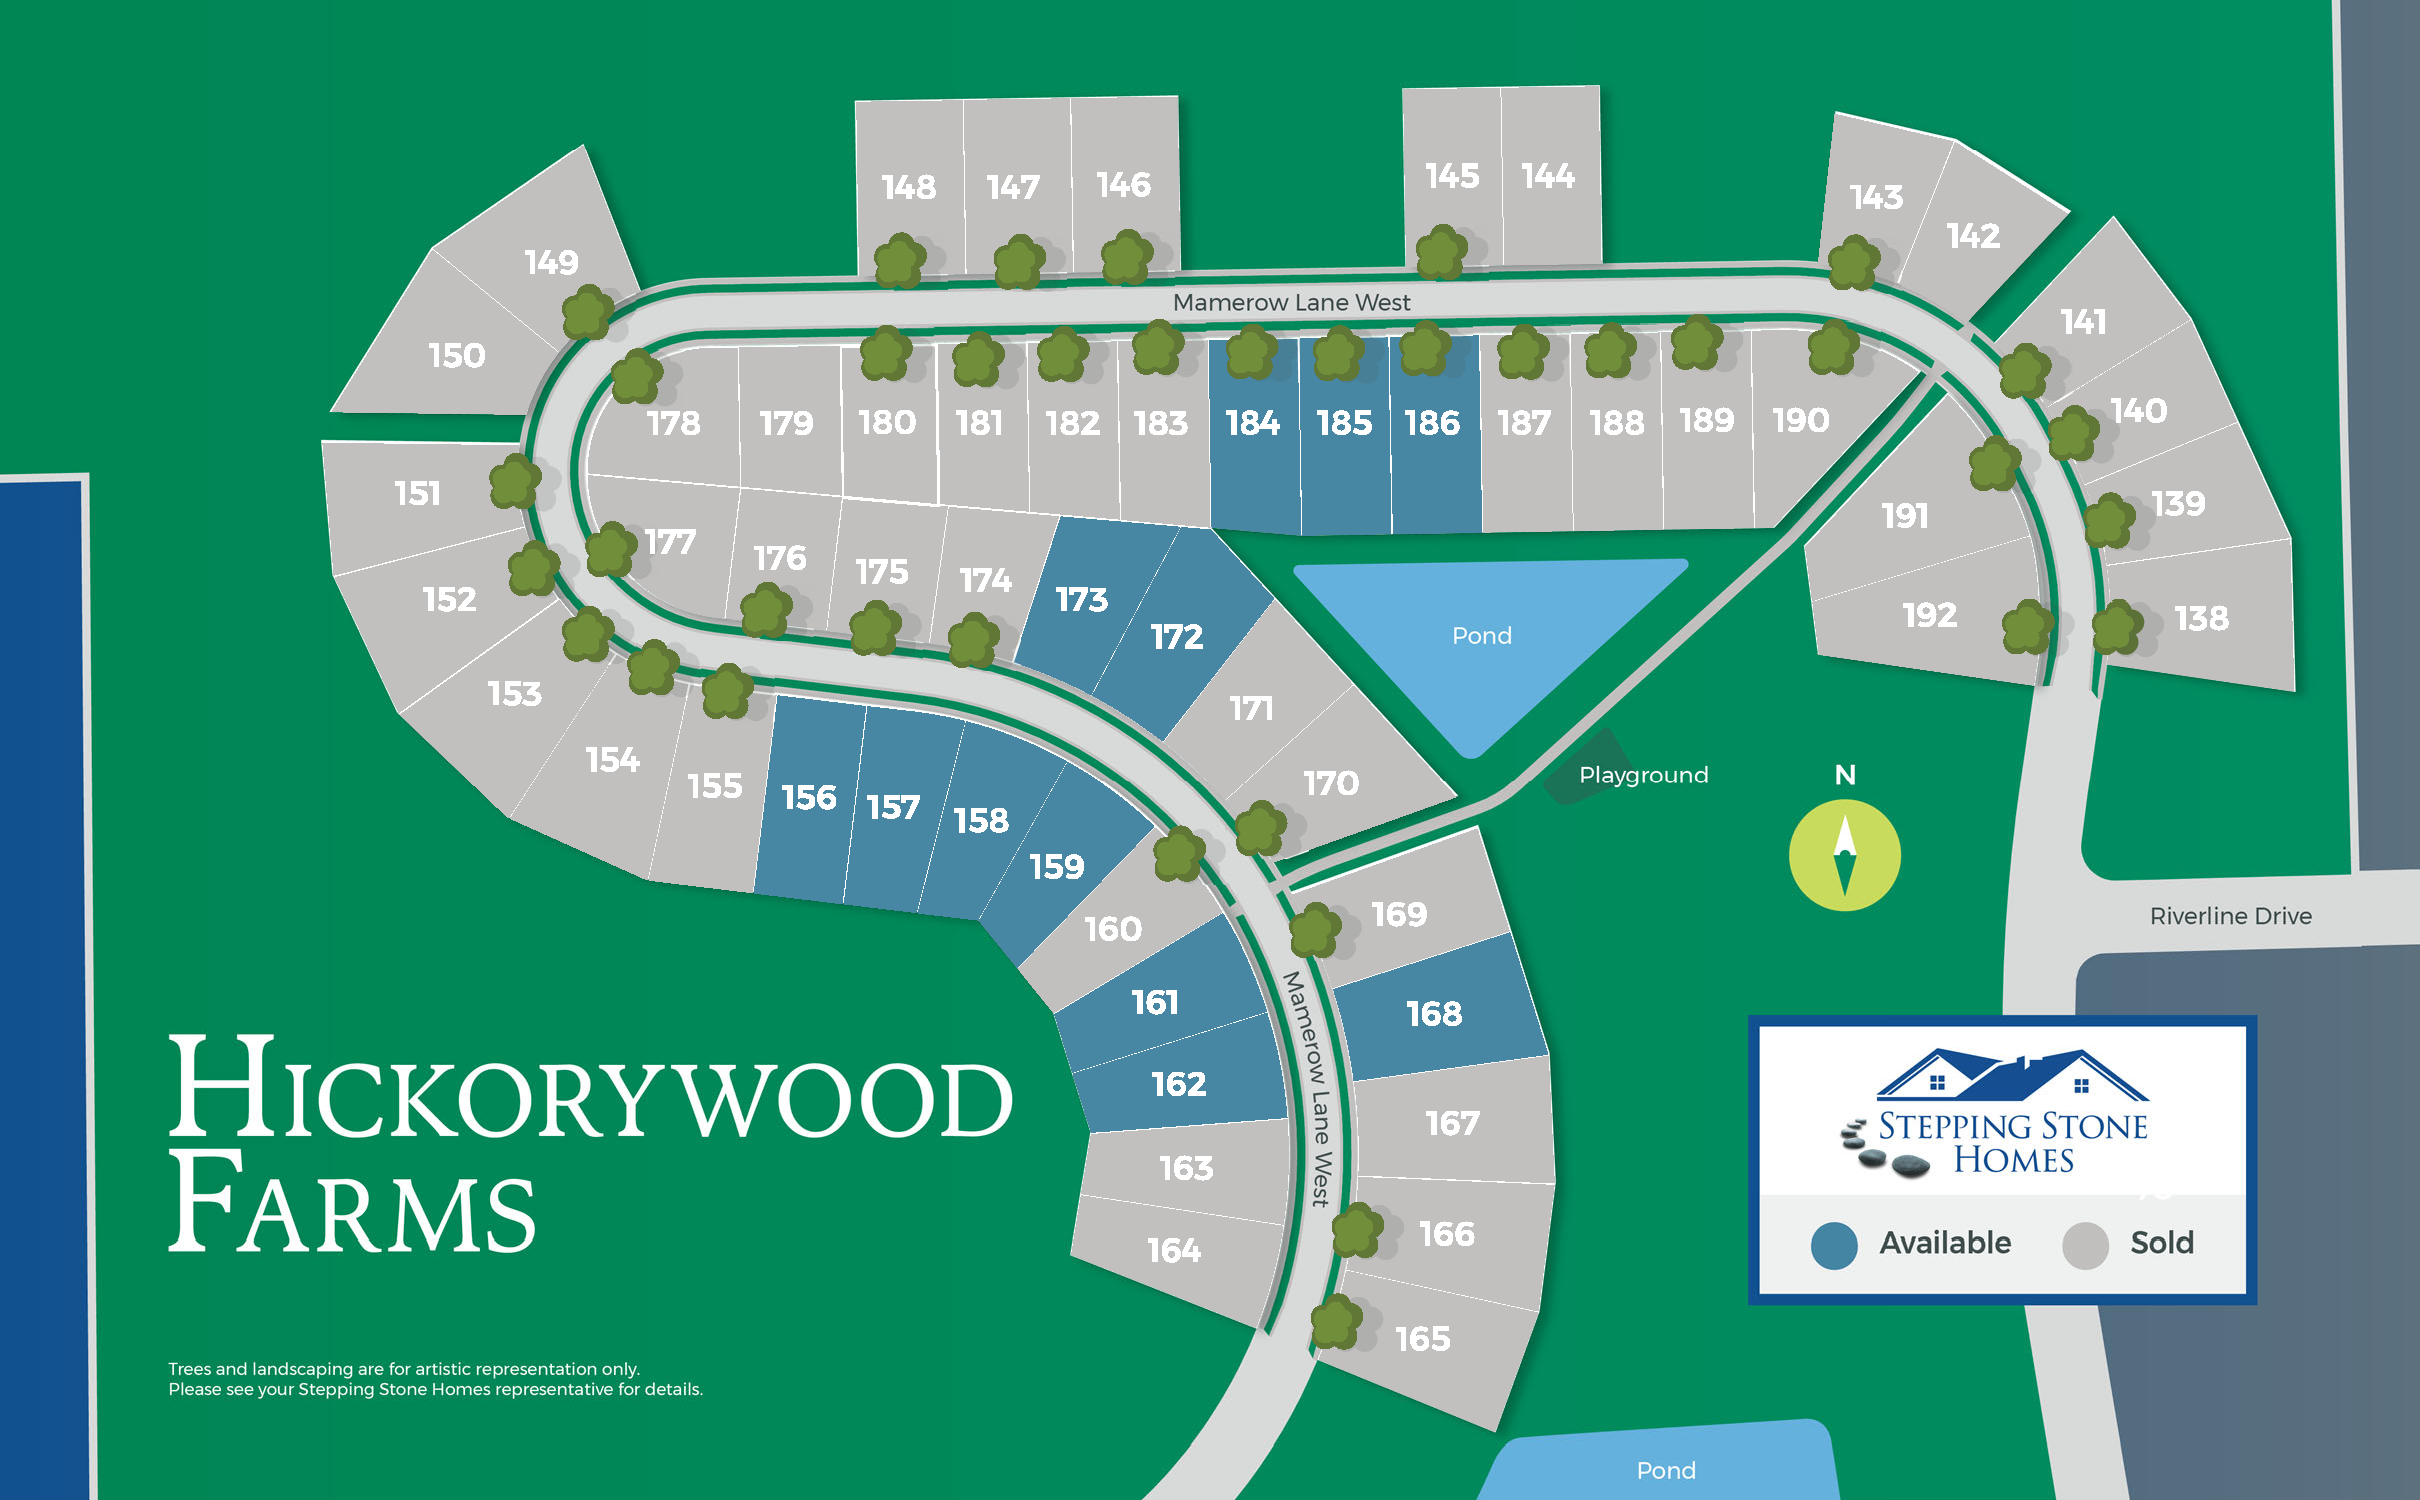 Stepping Stone Homes Hickorywood Farms Community